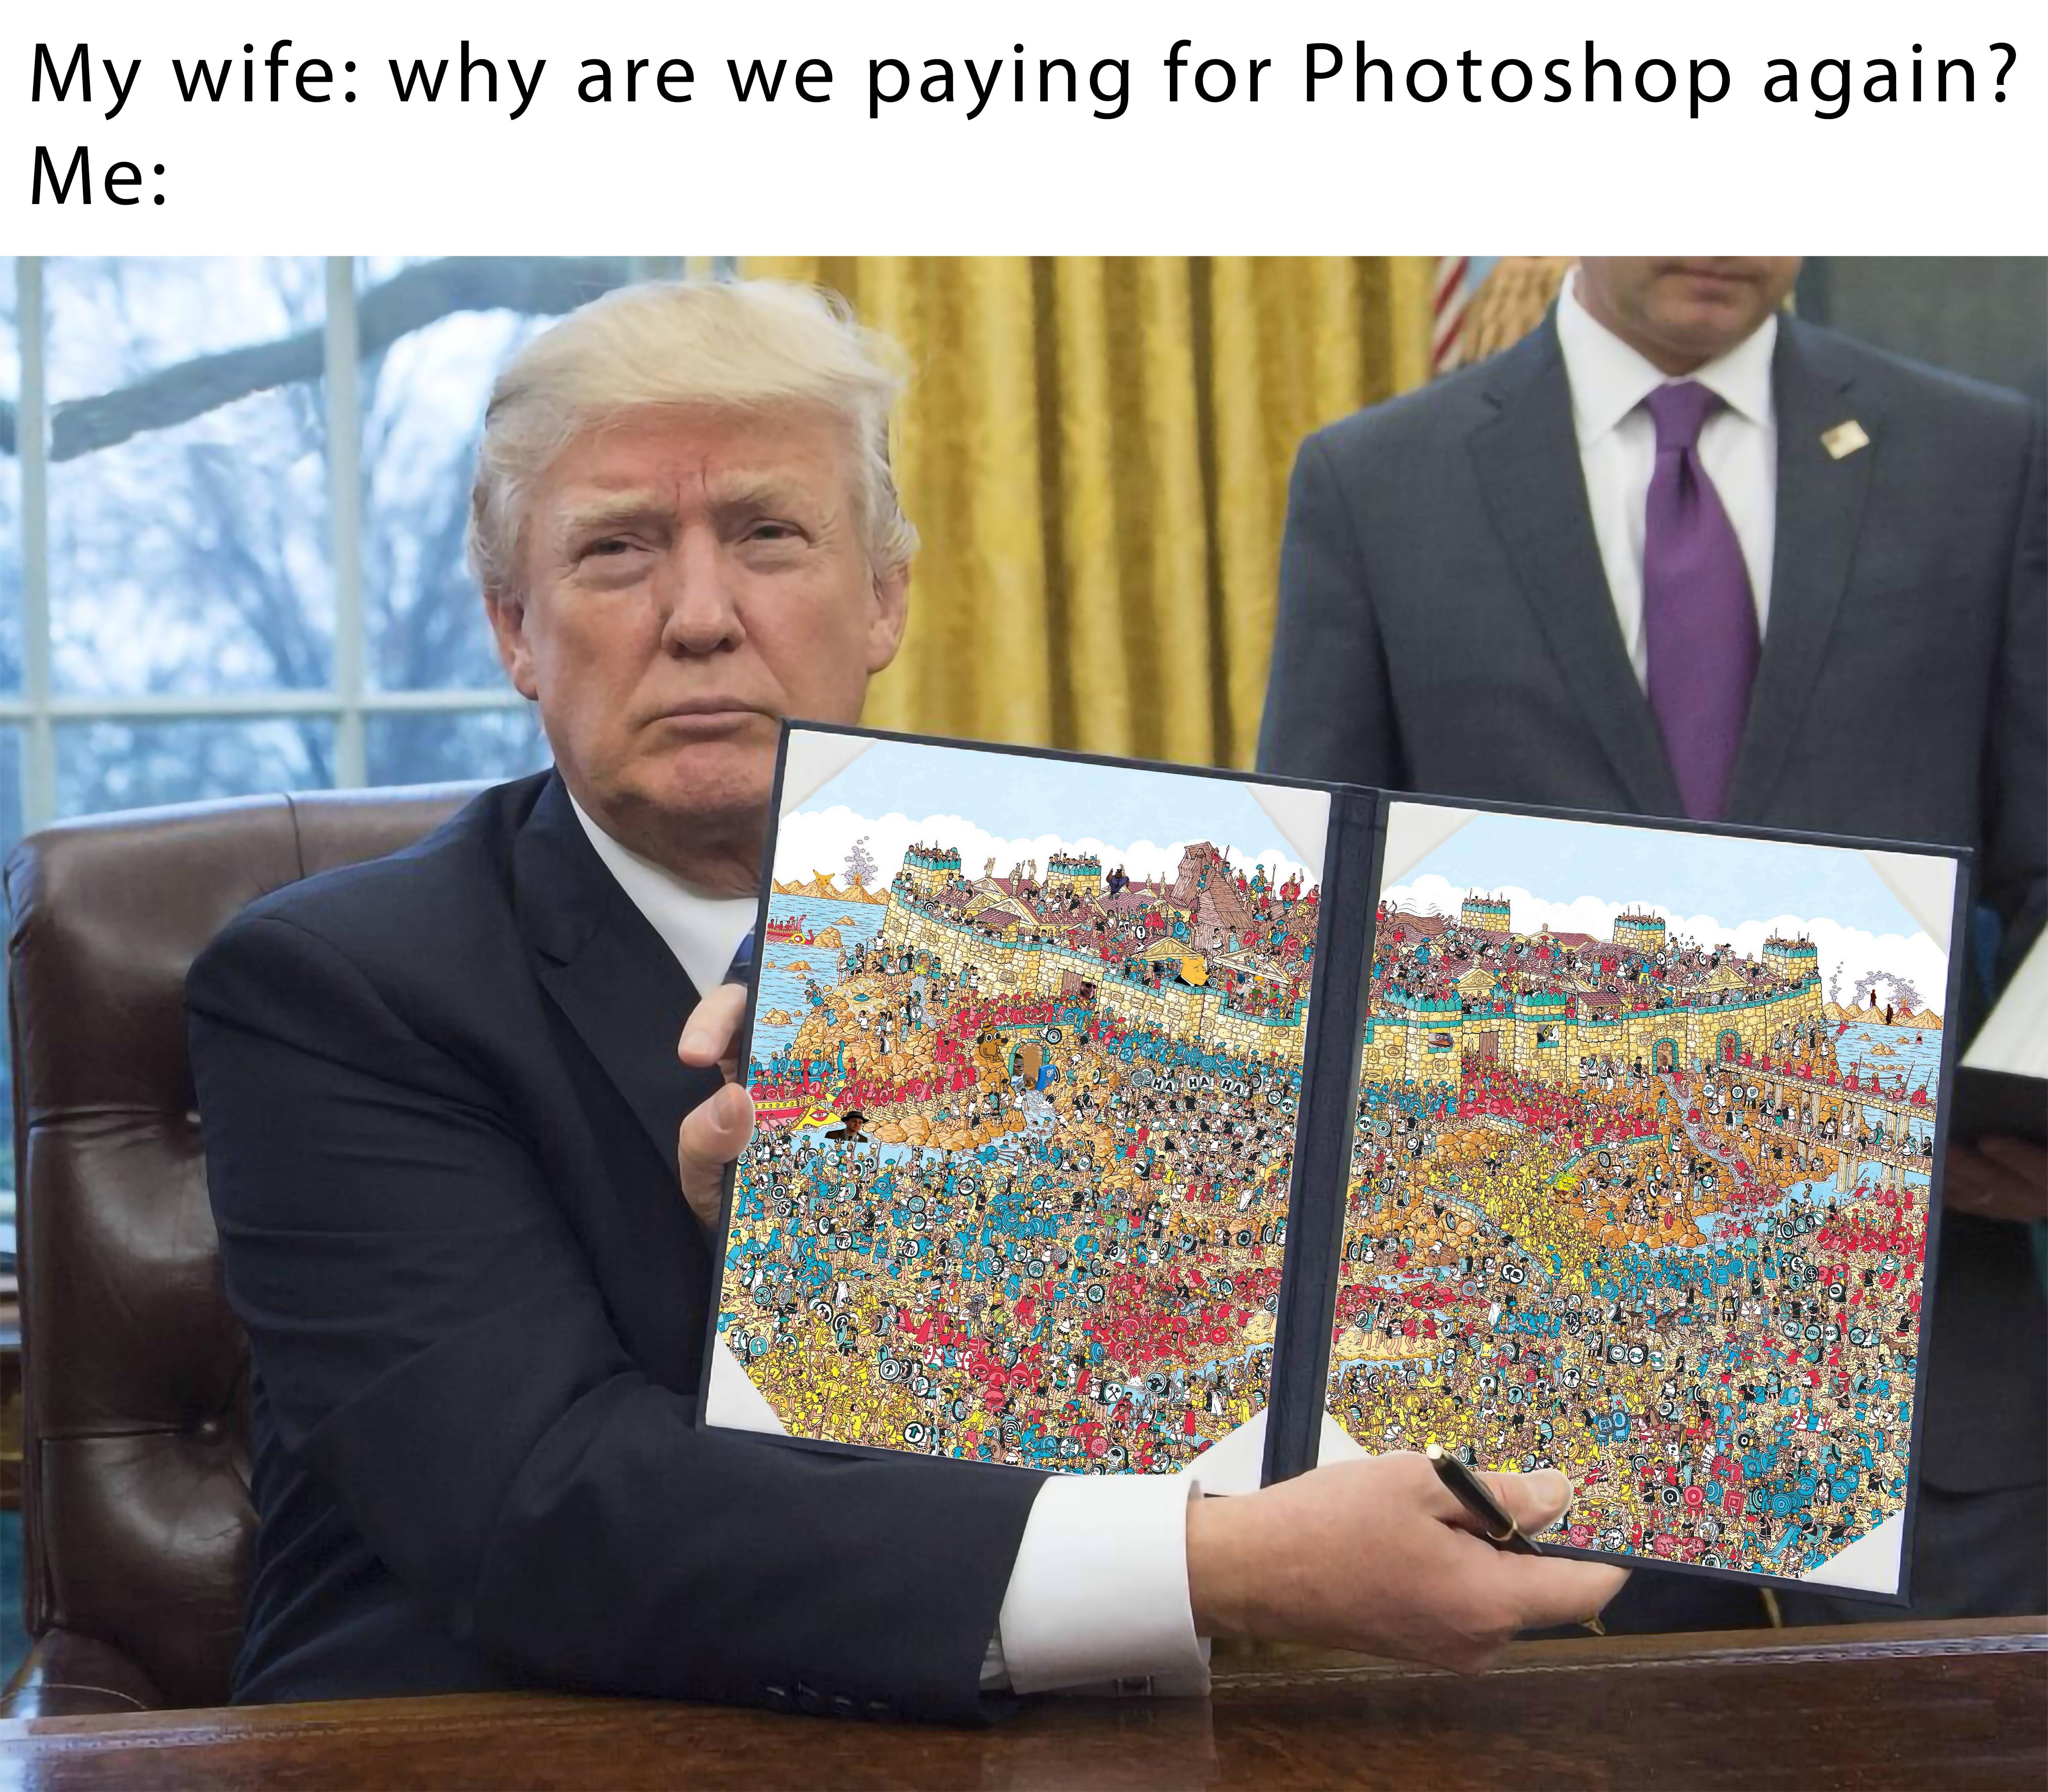 meme - trumps first order meme - My wife why are we paying for Photoshop again? Me